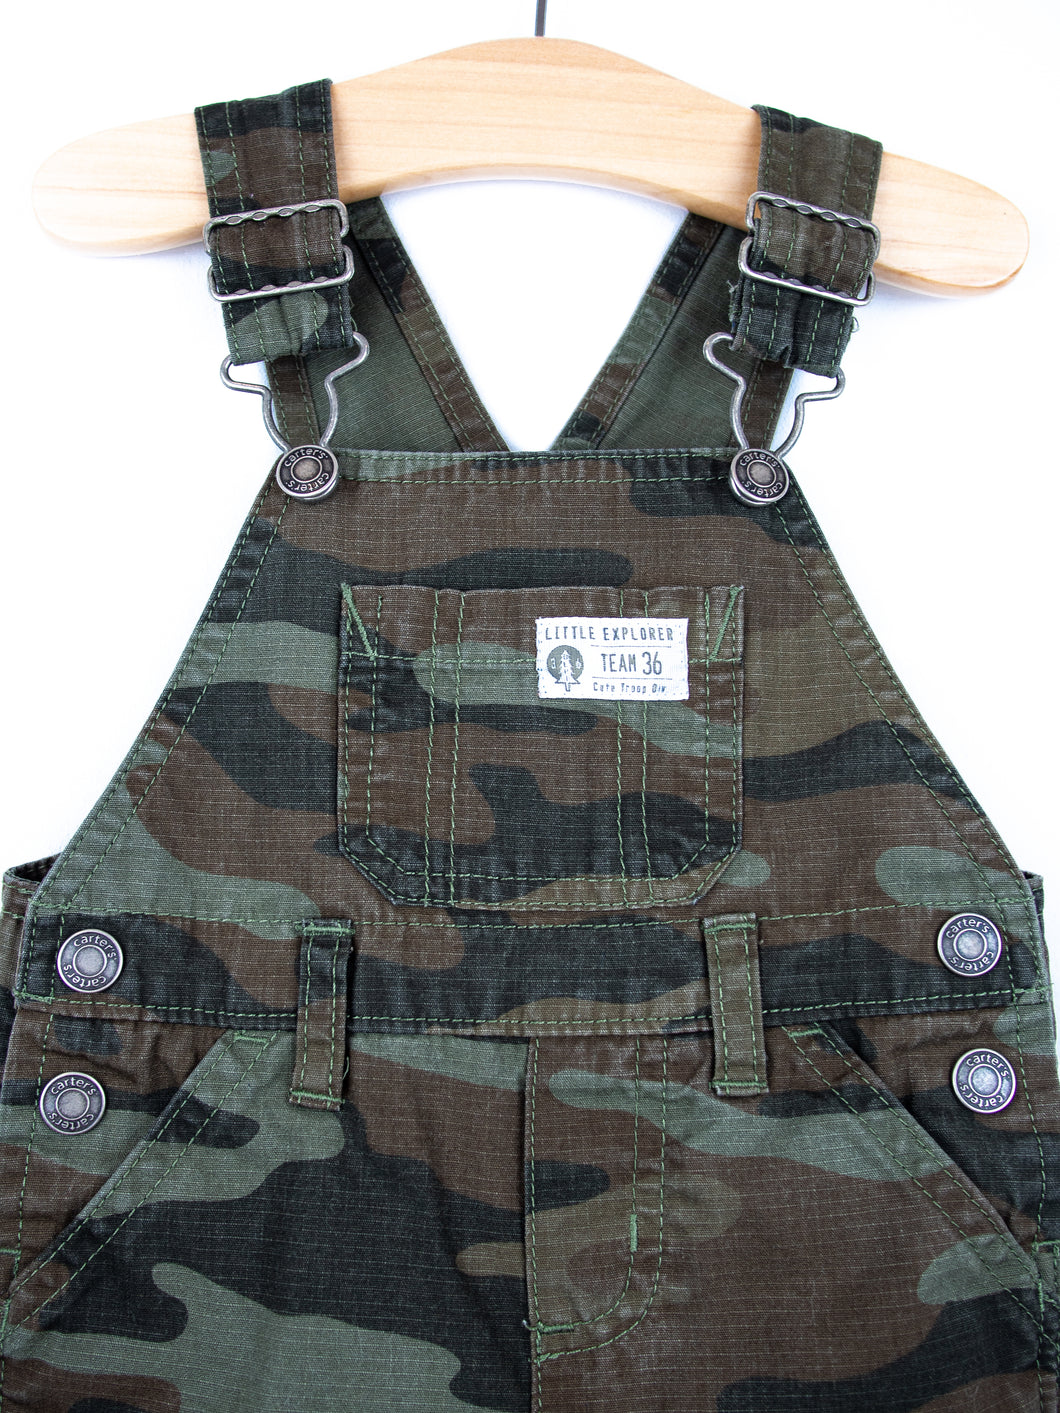 Vintage Carter's Camouflage Dungarees - Age 6 months